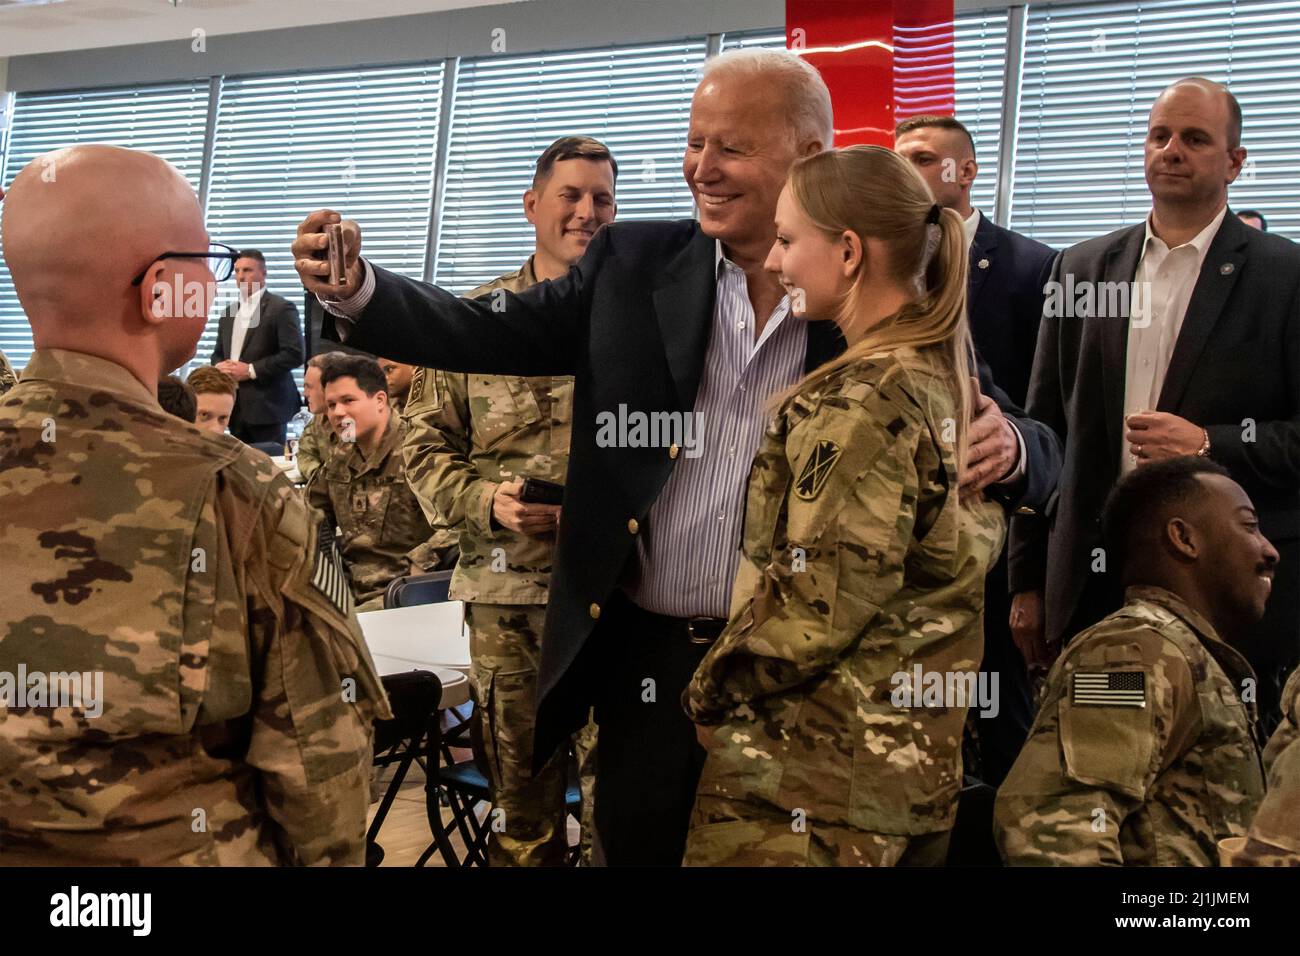 Jasionka, Poland. 25th Mar, 2022. President Joseph R. Biden Jr. visit and take selfies with Paratroopers in the 82nd Airborne Division, on March 25, 2022 in Rzeszów, Poland. The 82nd Airborne Division serves as the nation's Immediate Response Force, and maintains an ironclad commitment to our Allies and partners. (U.S. Army Photos by Sgt. Gerald Holman) Credit: Sgt. Gerald Holman/U.S. Army/Alamy Live News Stock Photo